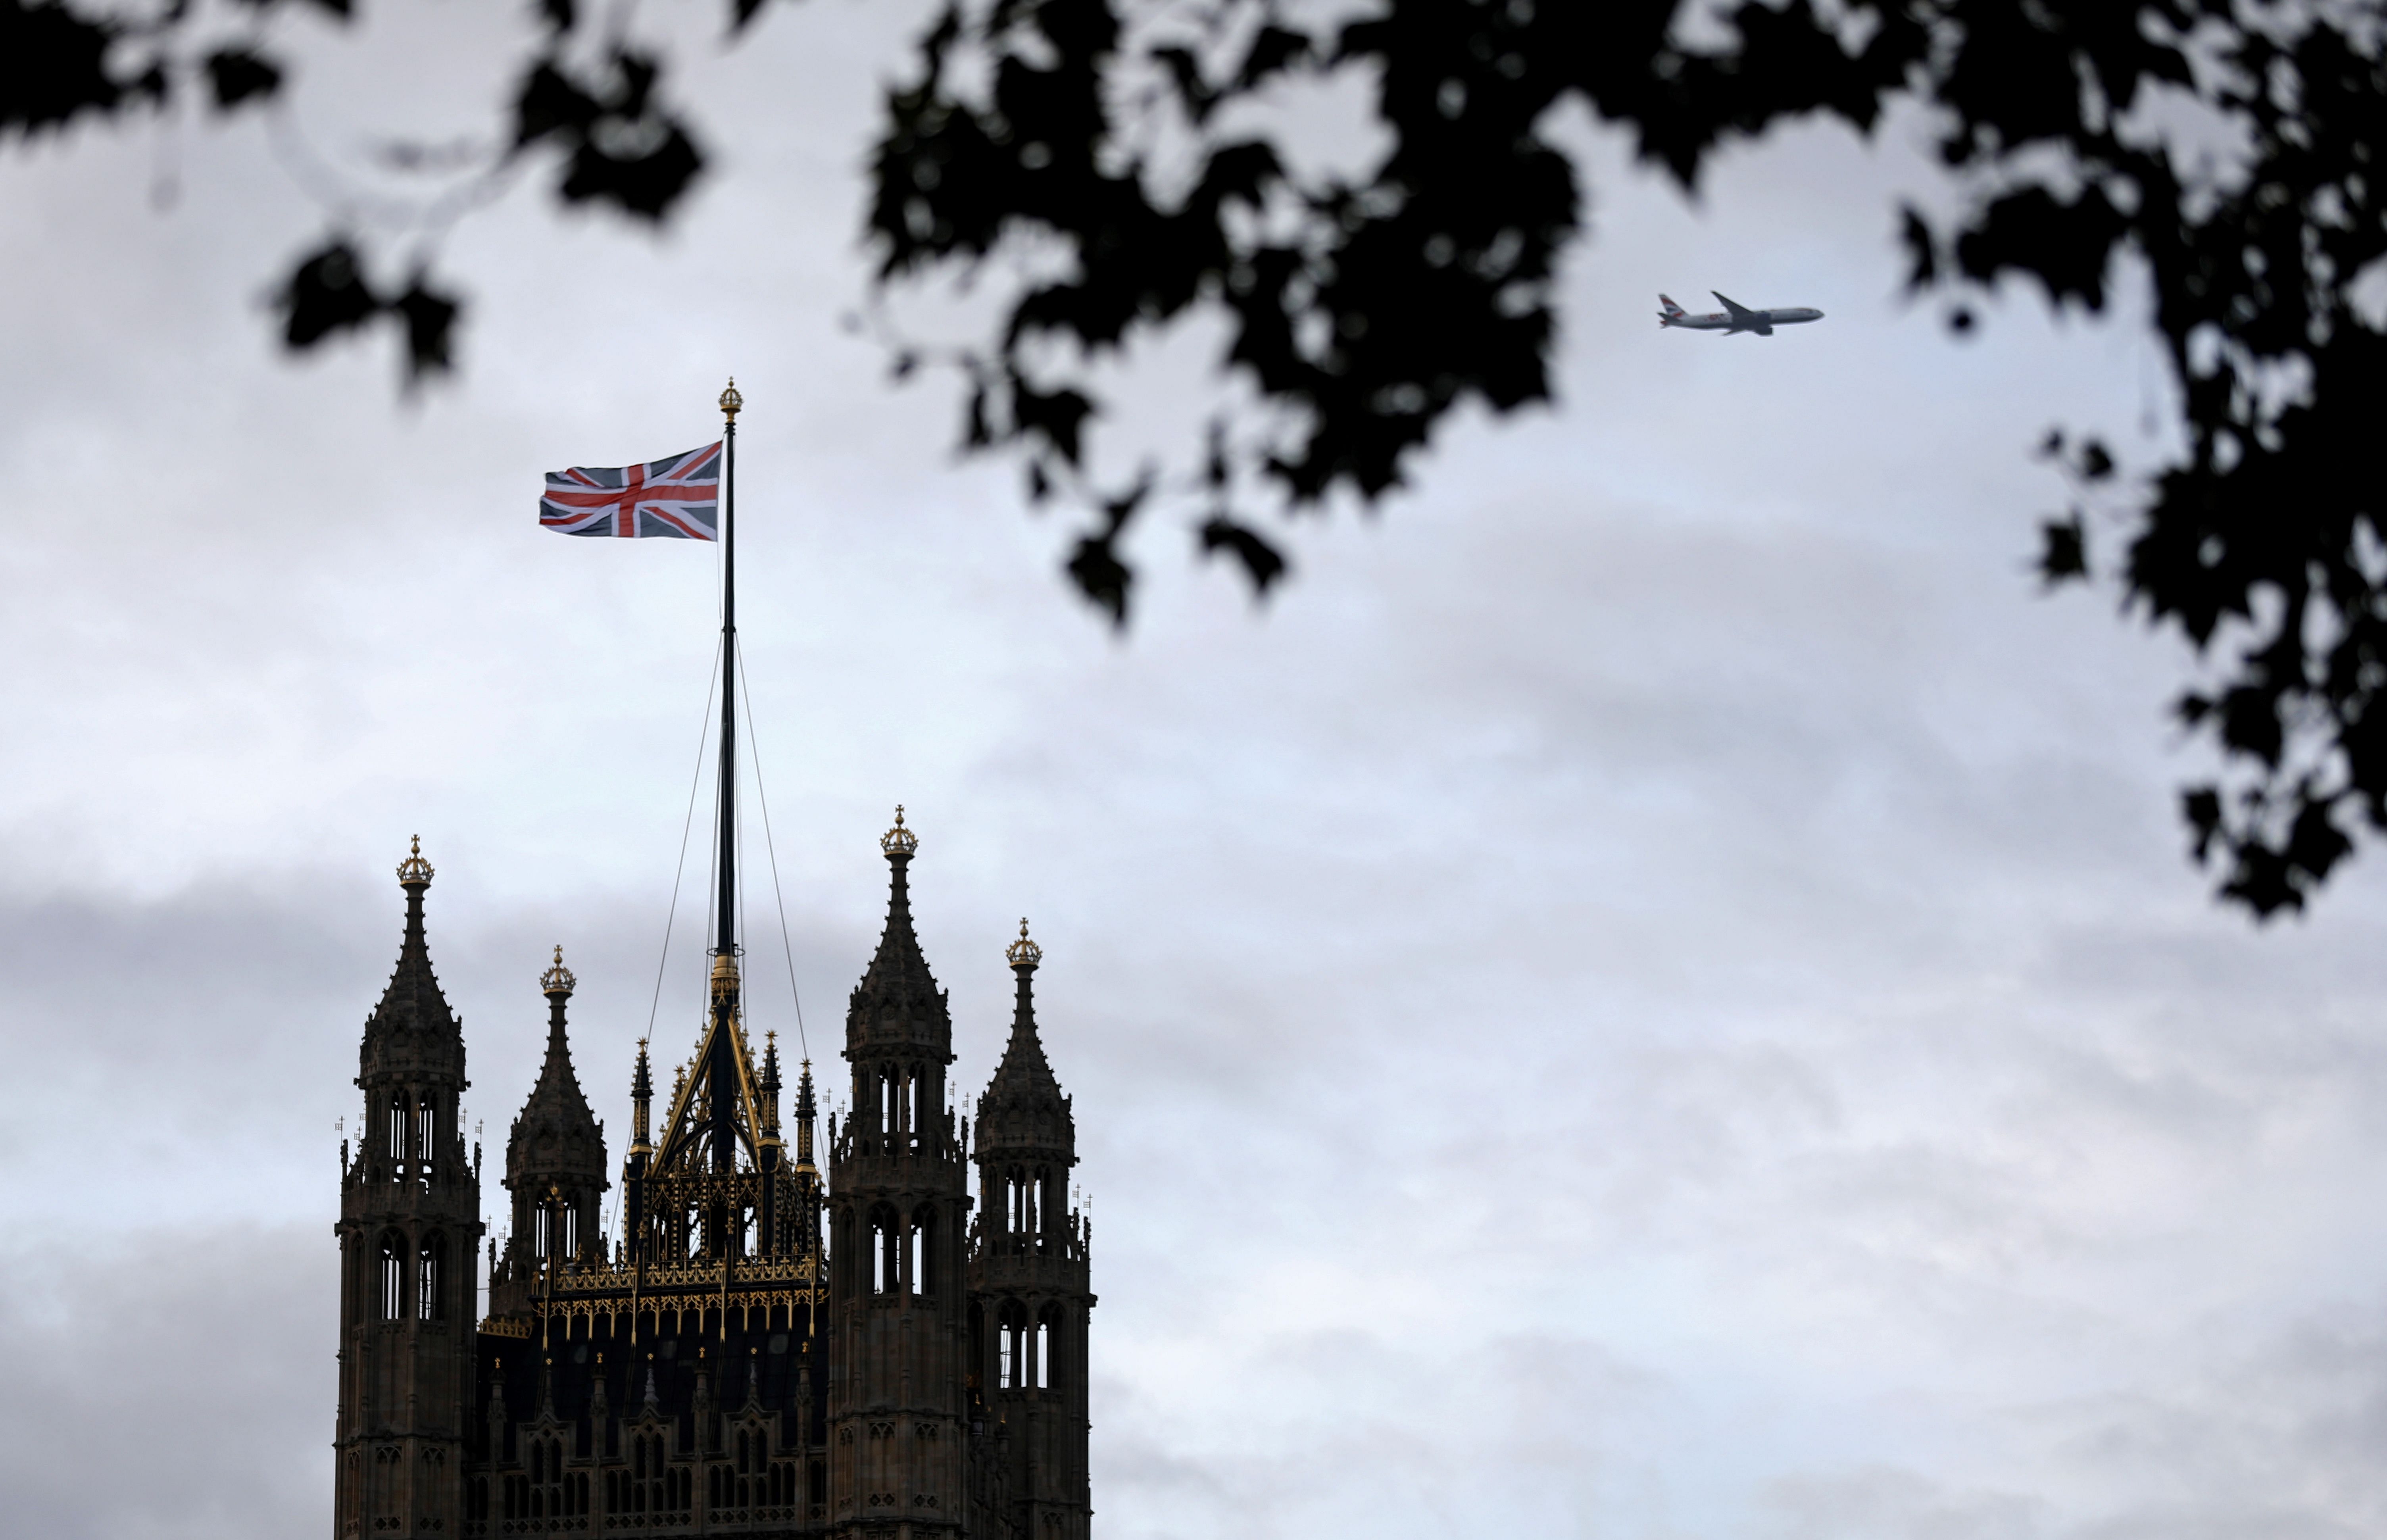 A Union flag flies from a pole atop the Victoria Tower at the Houses of Parliament in London on October 9, 2019. (Credit: AFP)